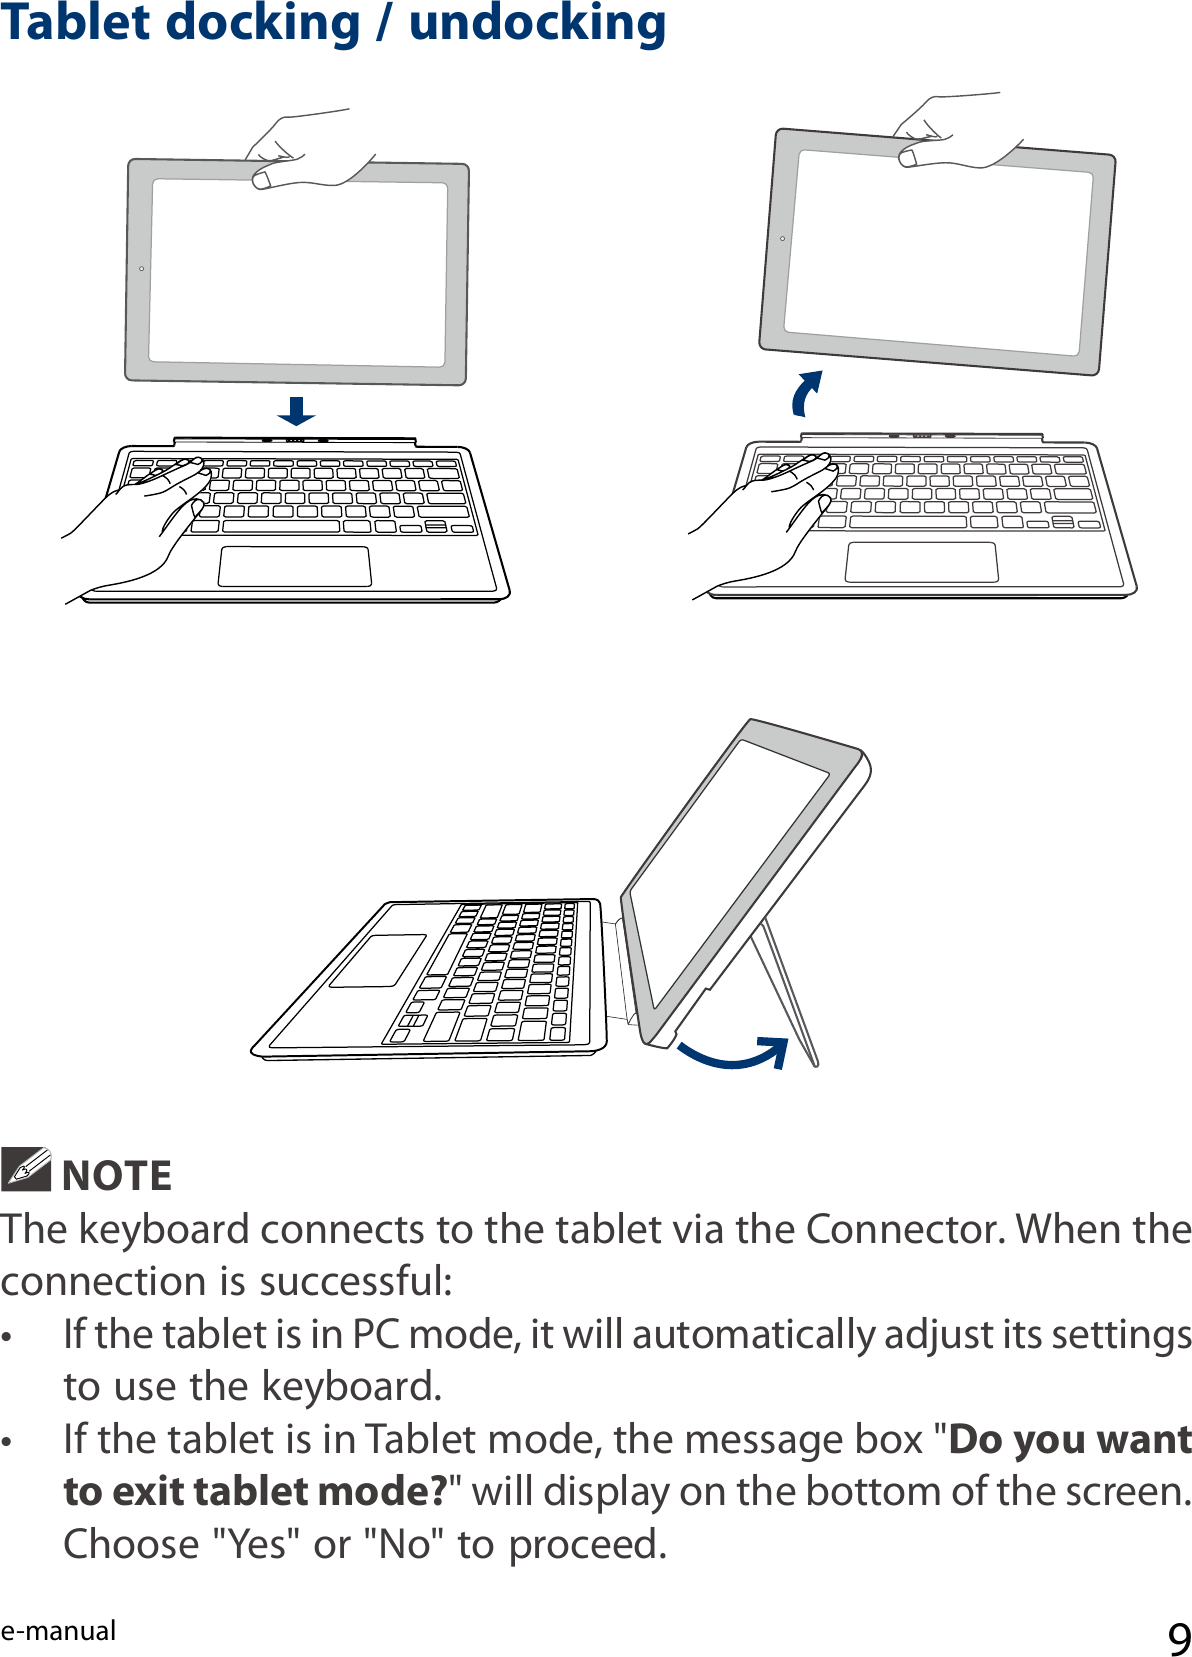 e-manual 9 NOTEThe keyboard connects to the tablet via the Connector. When the connection is successful: •  If the tablet is in PC mode, it will automatically adjust its settings to use the keyboard.•  If the tablet is in Tablet mode, the message box &quot;Do you want to exit tablet mode?&quot; will display on the bottom of the screen. Choose &quot;Yes&quot; or &quot;No&quot; to proceed.Tablet docking / undocking